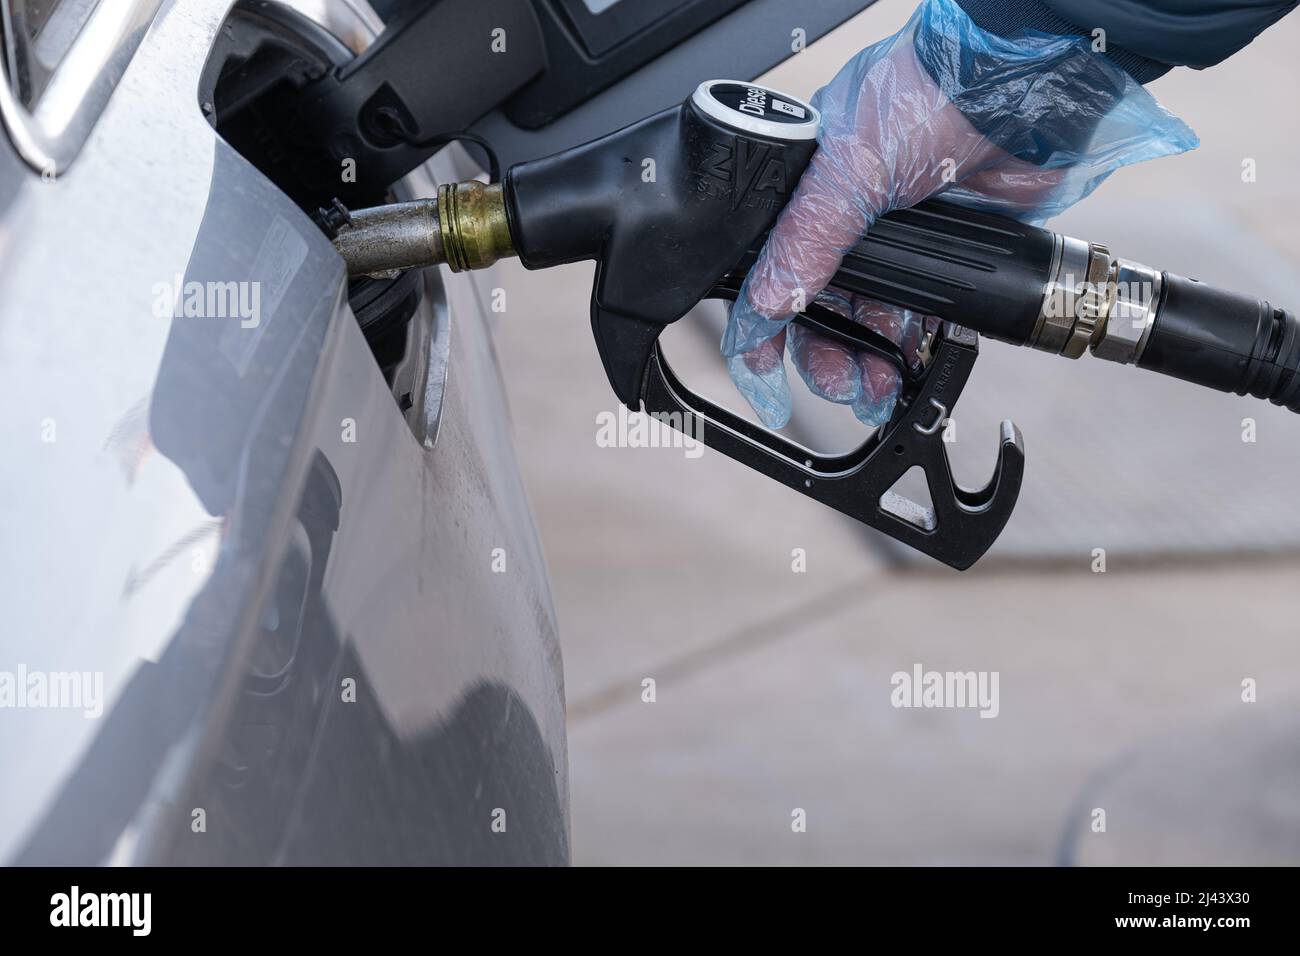 Diesel. Refueling the car.Refueling pistol in the hands of a man in a glove.A man fills up a car tank with diesel fuel. Stock Photo